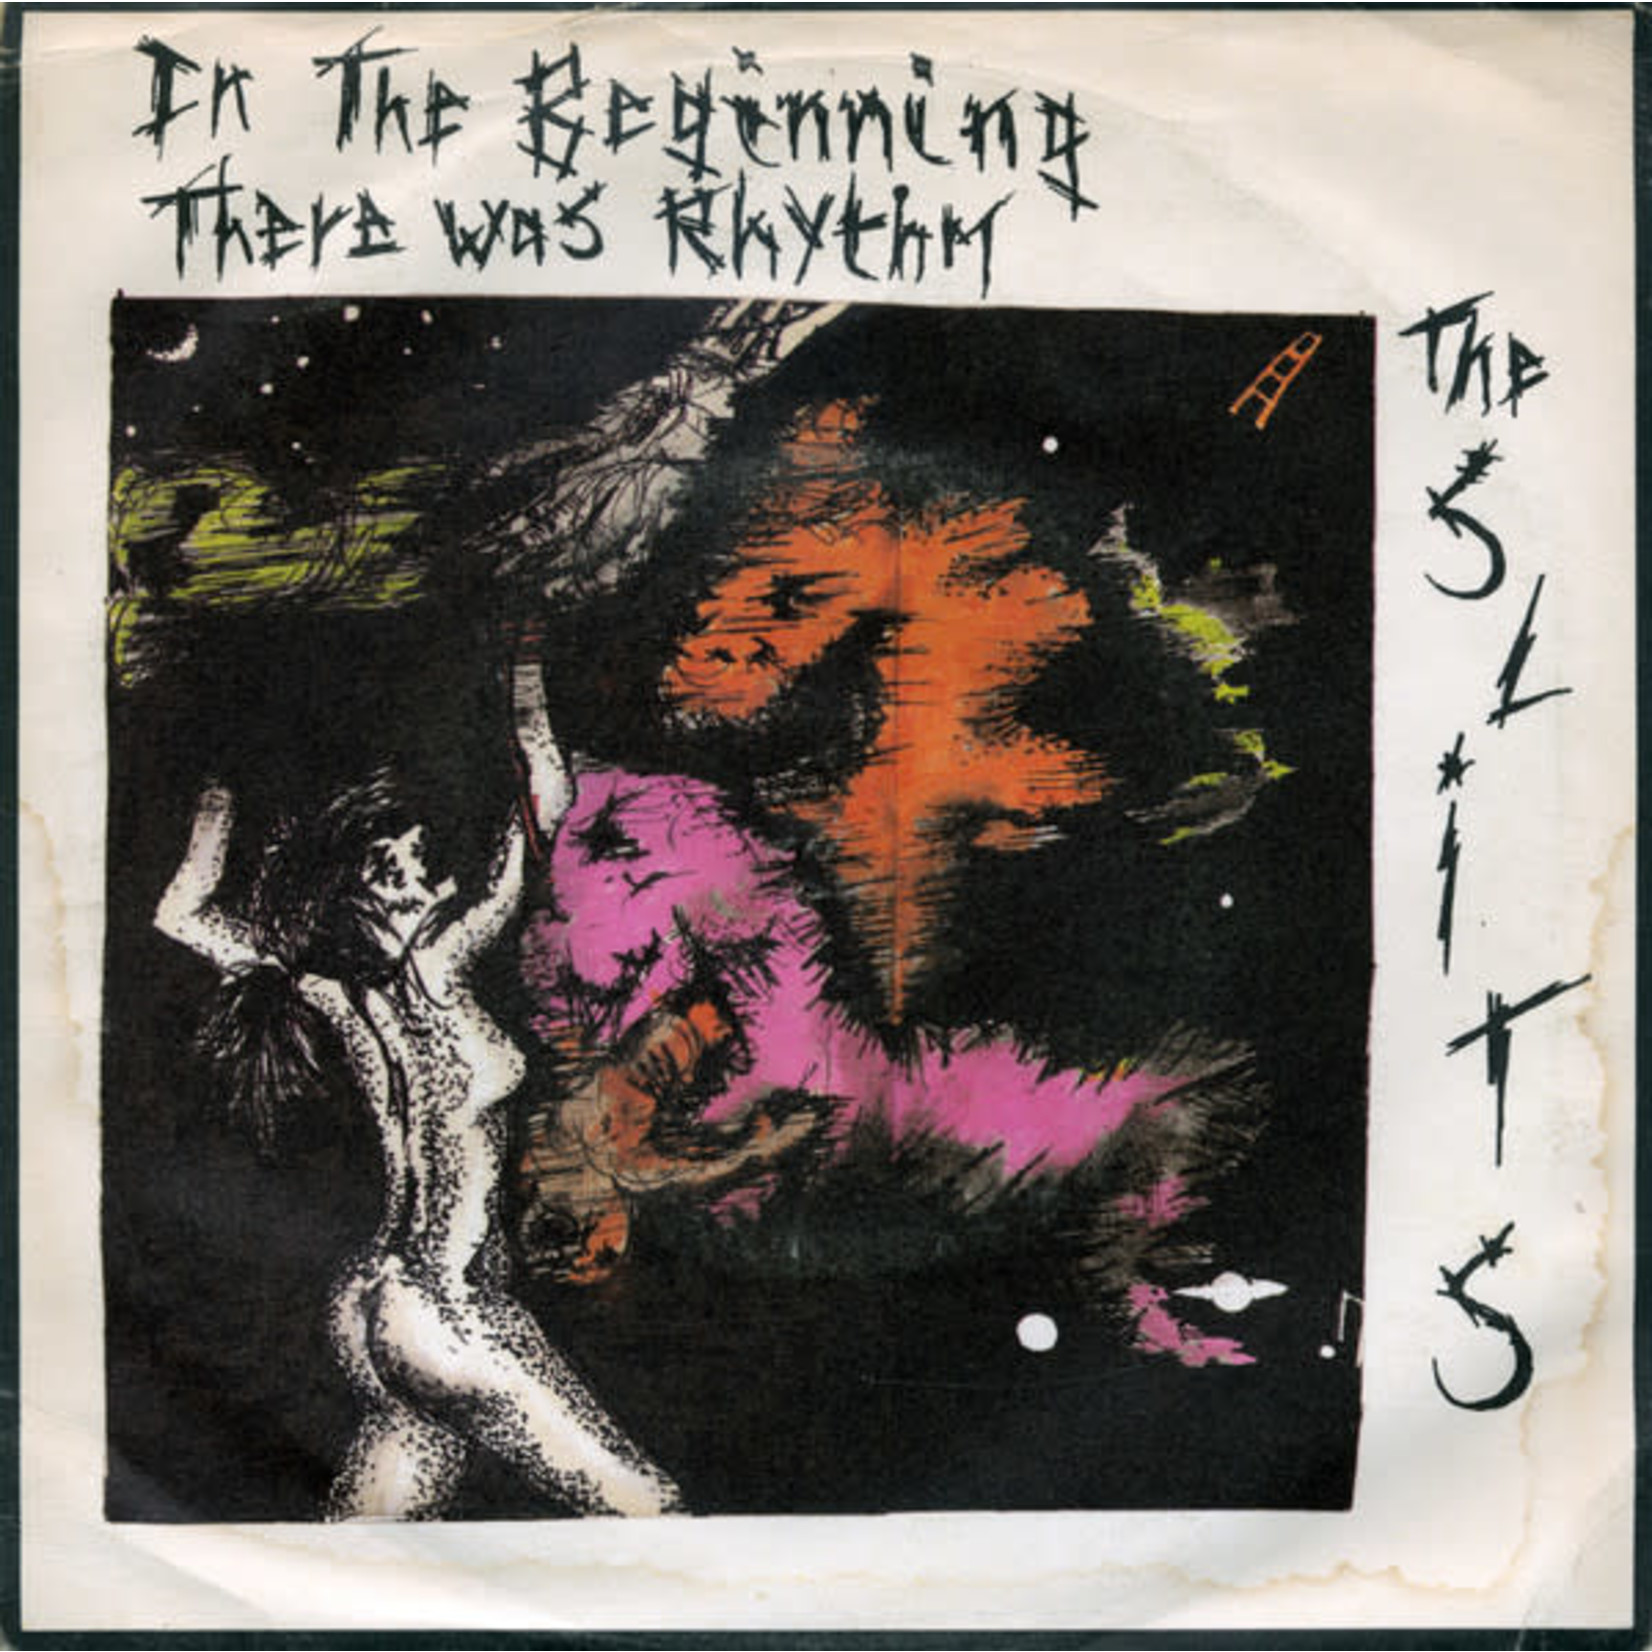 [Kollectibles] Slits / The Pop Group - In The Beginning There Was Rhythm b/w Where There's A Will... (7", 1980 UK, Cover VG+/Disc VG+)